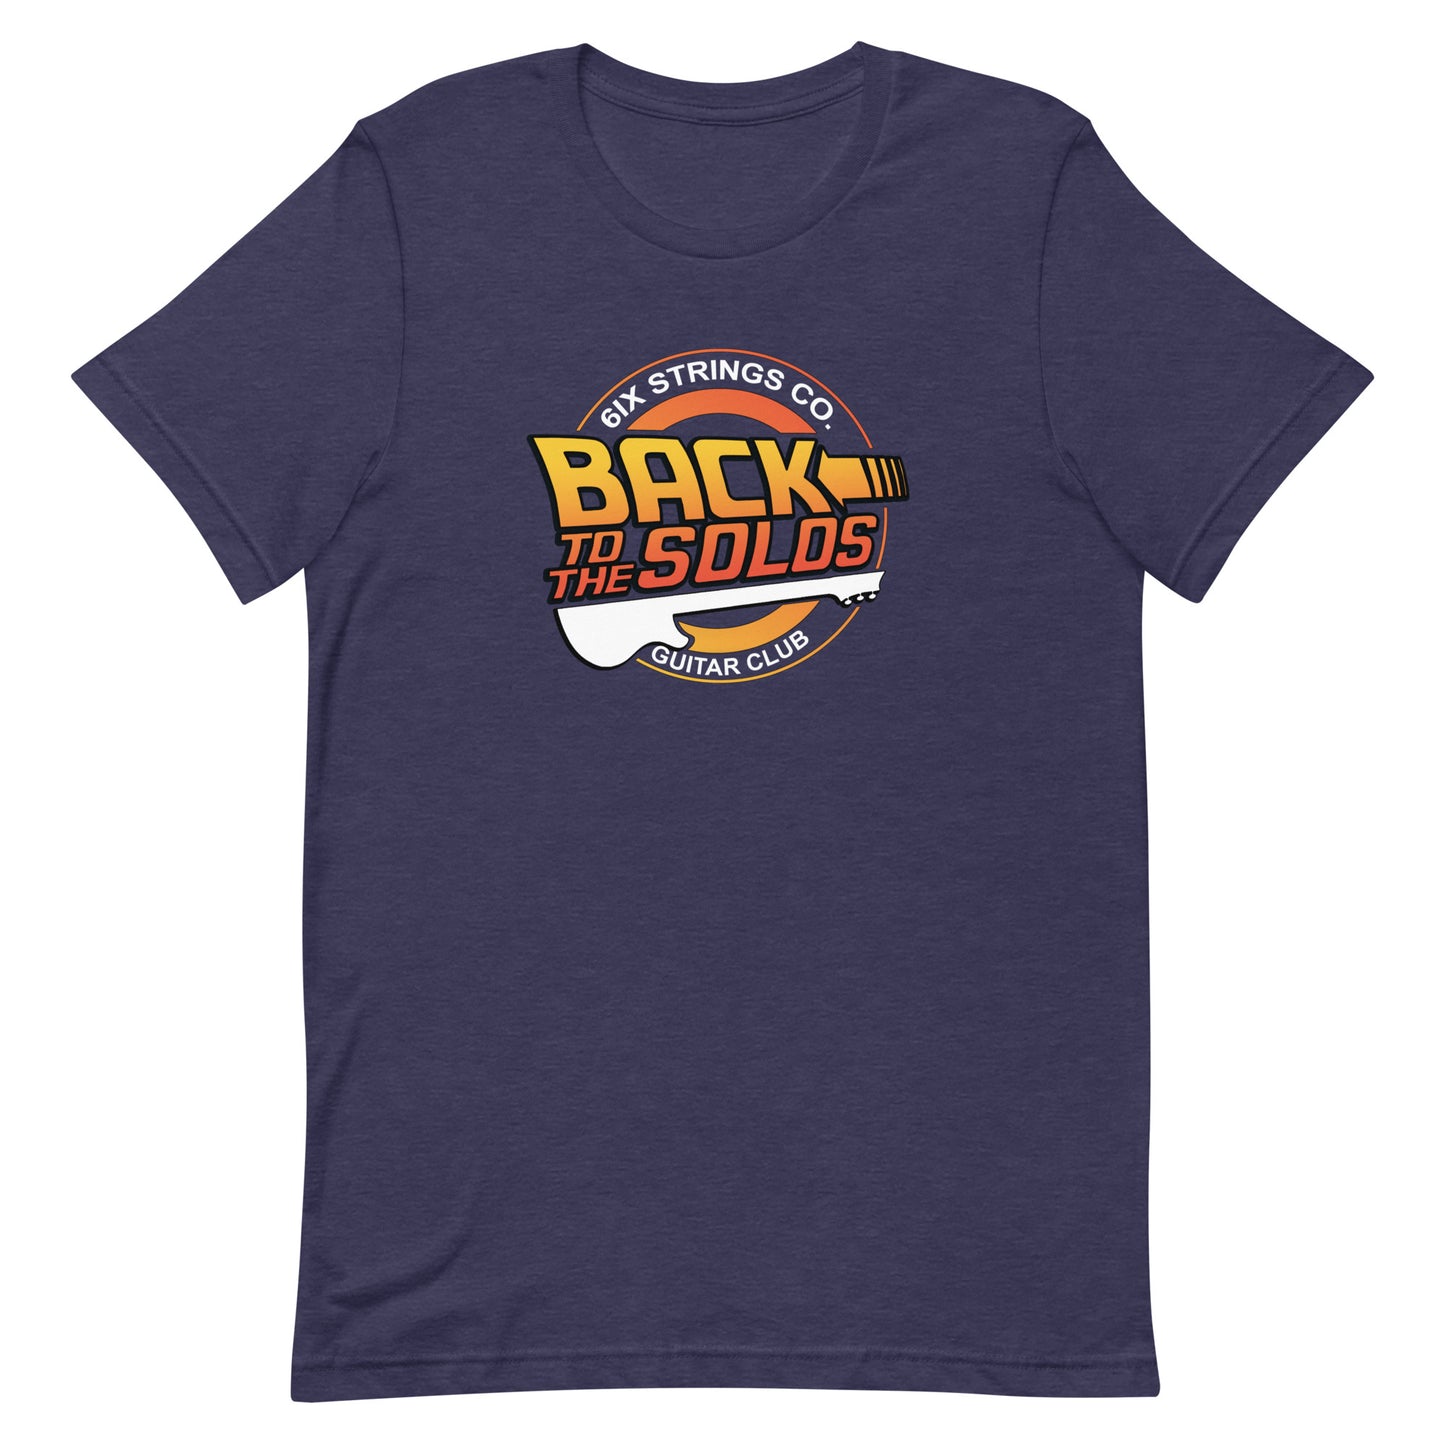 'Back To The Solos' - Blue Tee